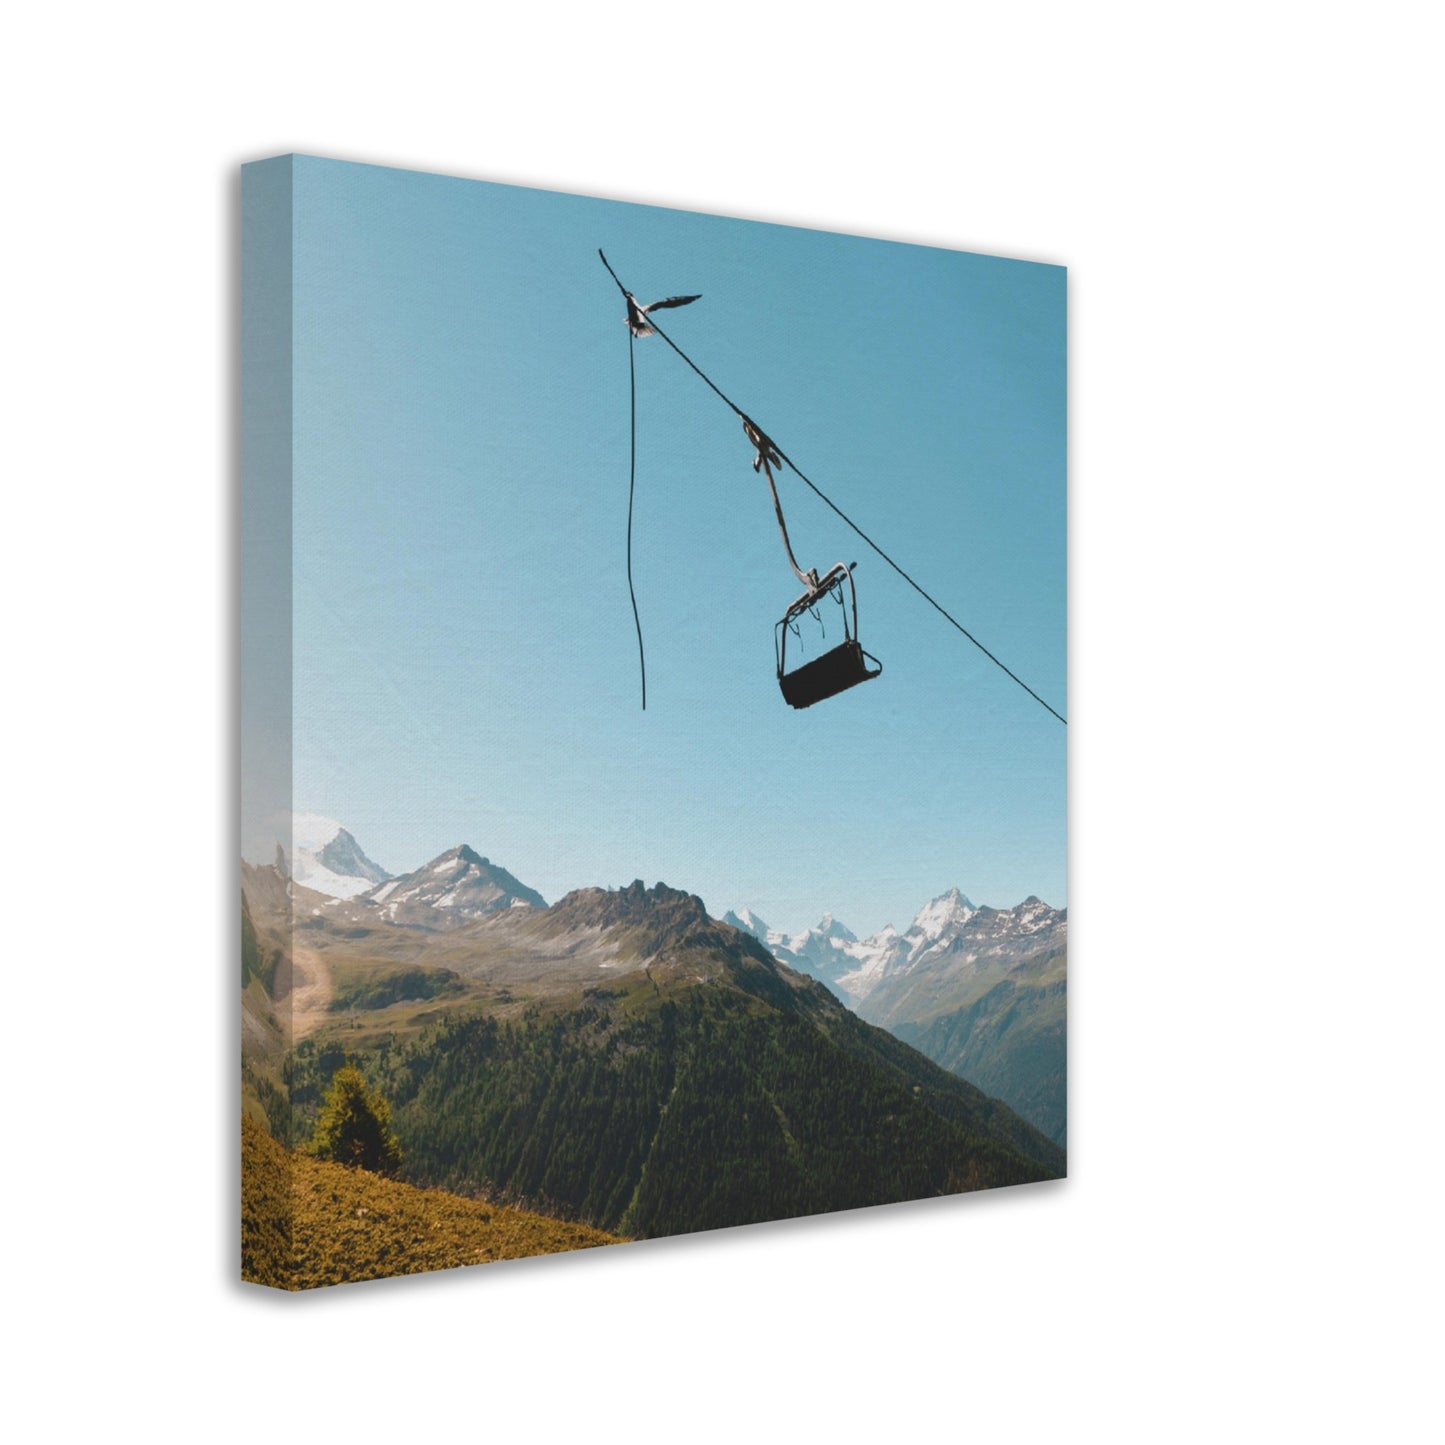 Chairlift #1 - Canvas Print